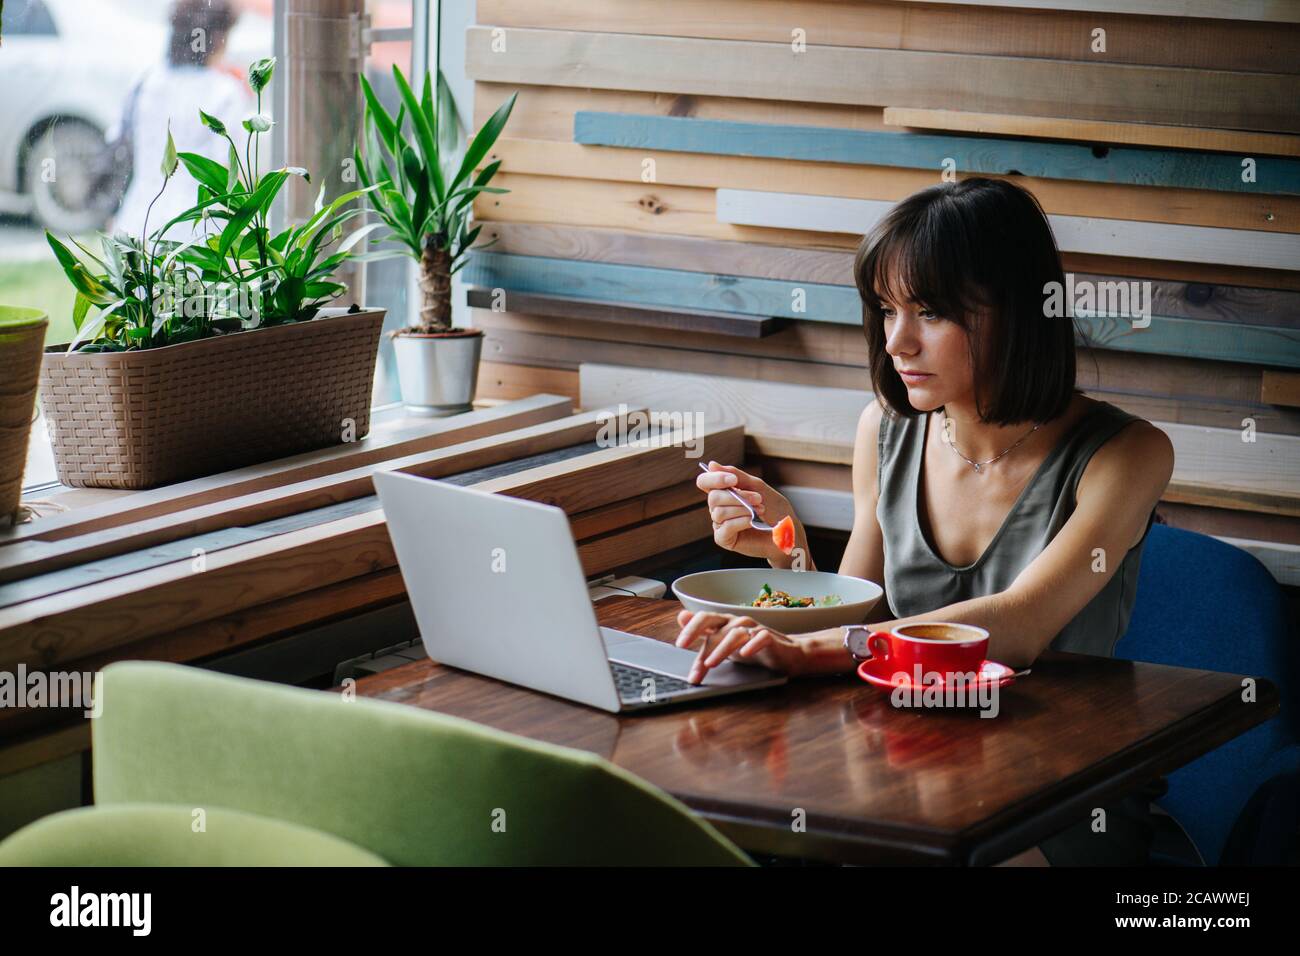 Immersed woman eating vegeterian dish in a cafe while watching her laptop. Stock Photo